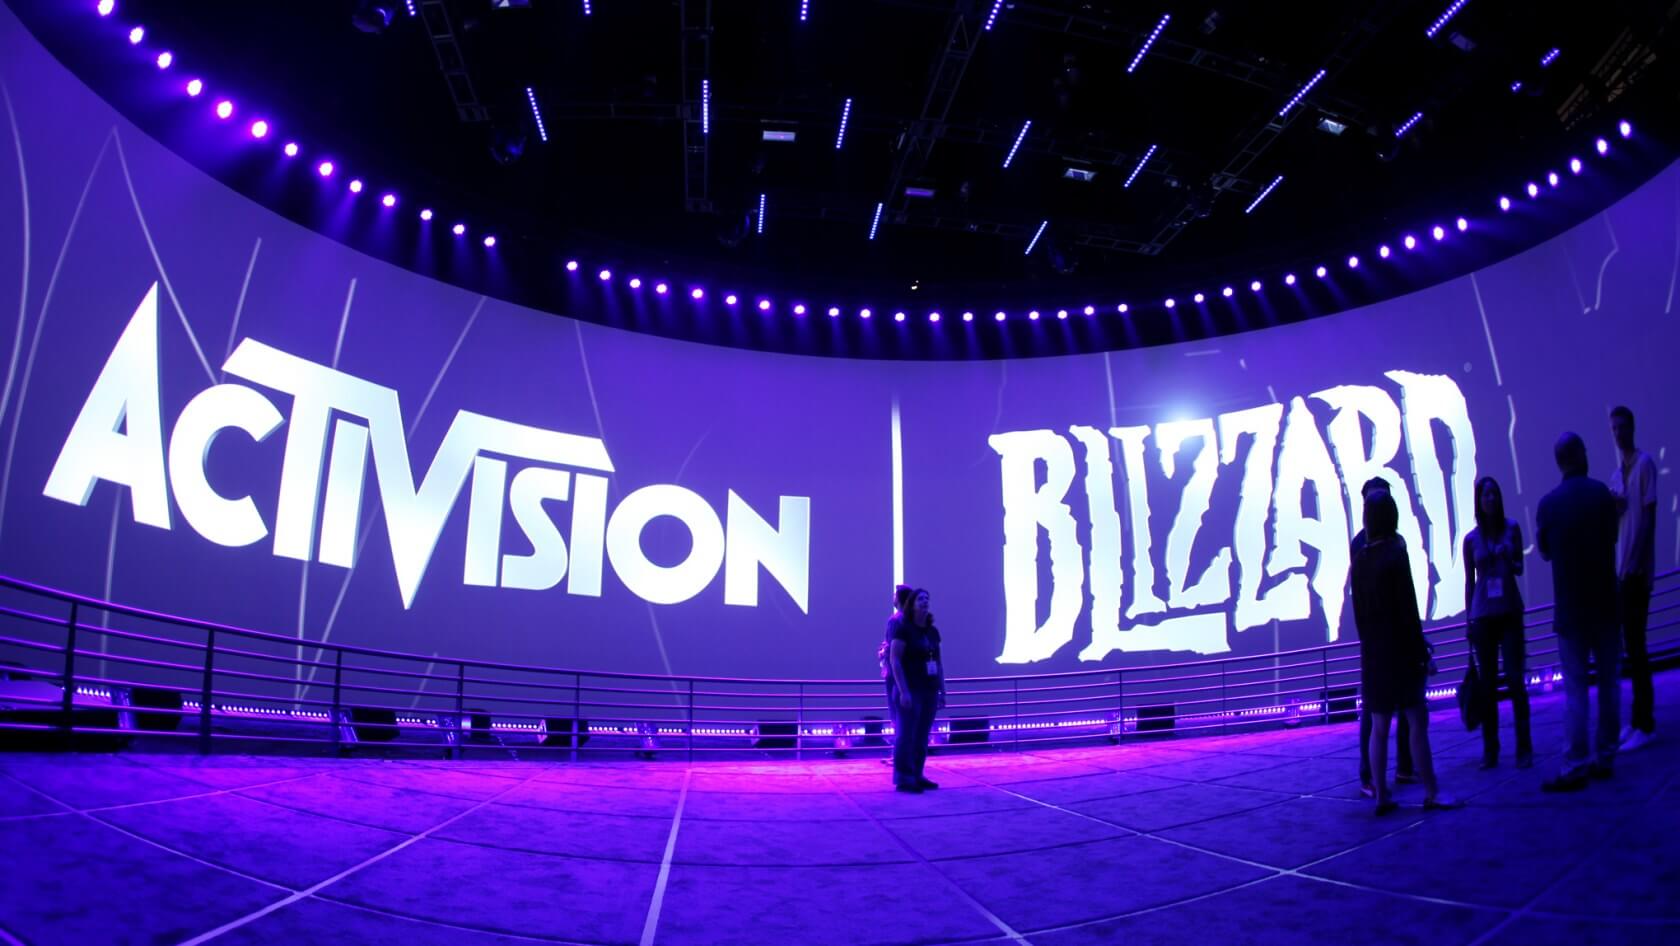 Activision Blizzard is reportedly giving its employees gift cards in exchange for anonymized pregnancy tracking data